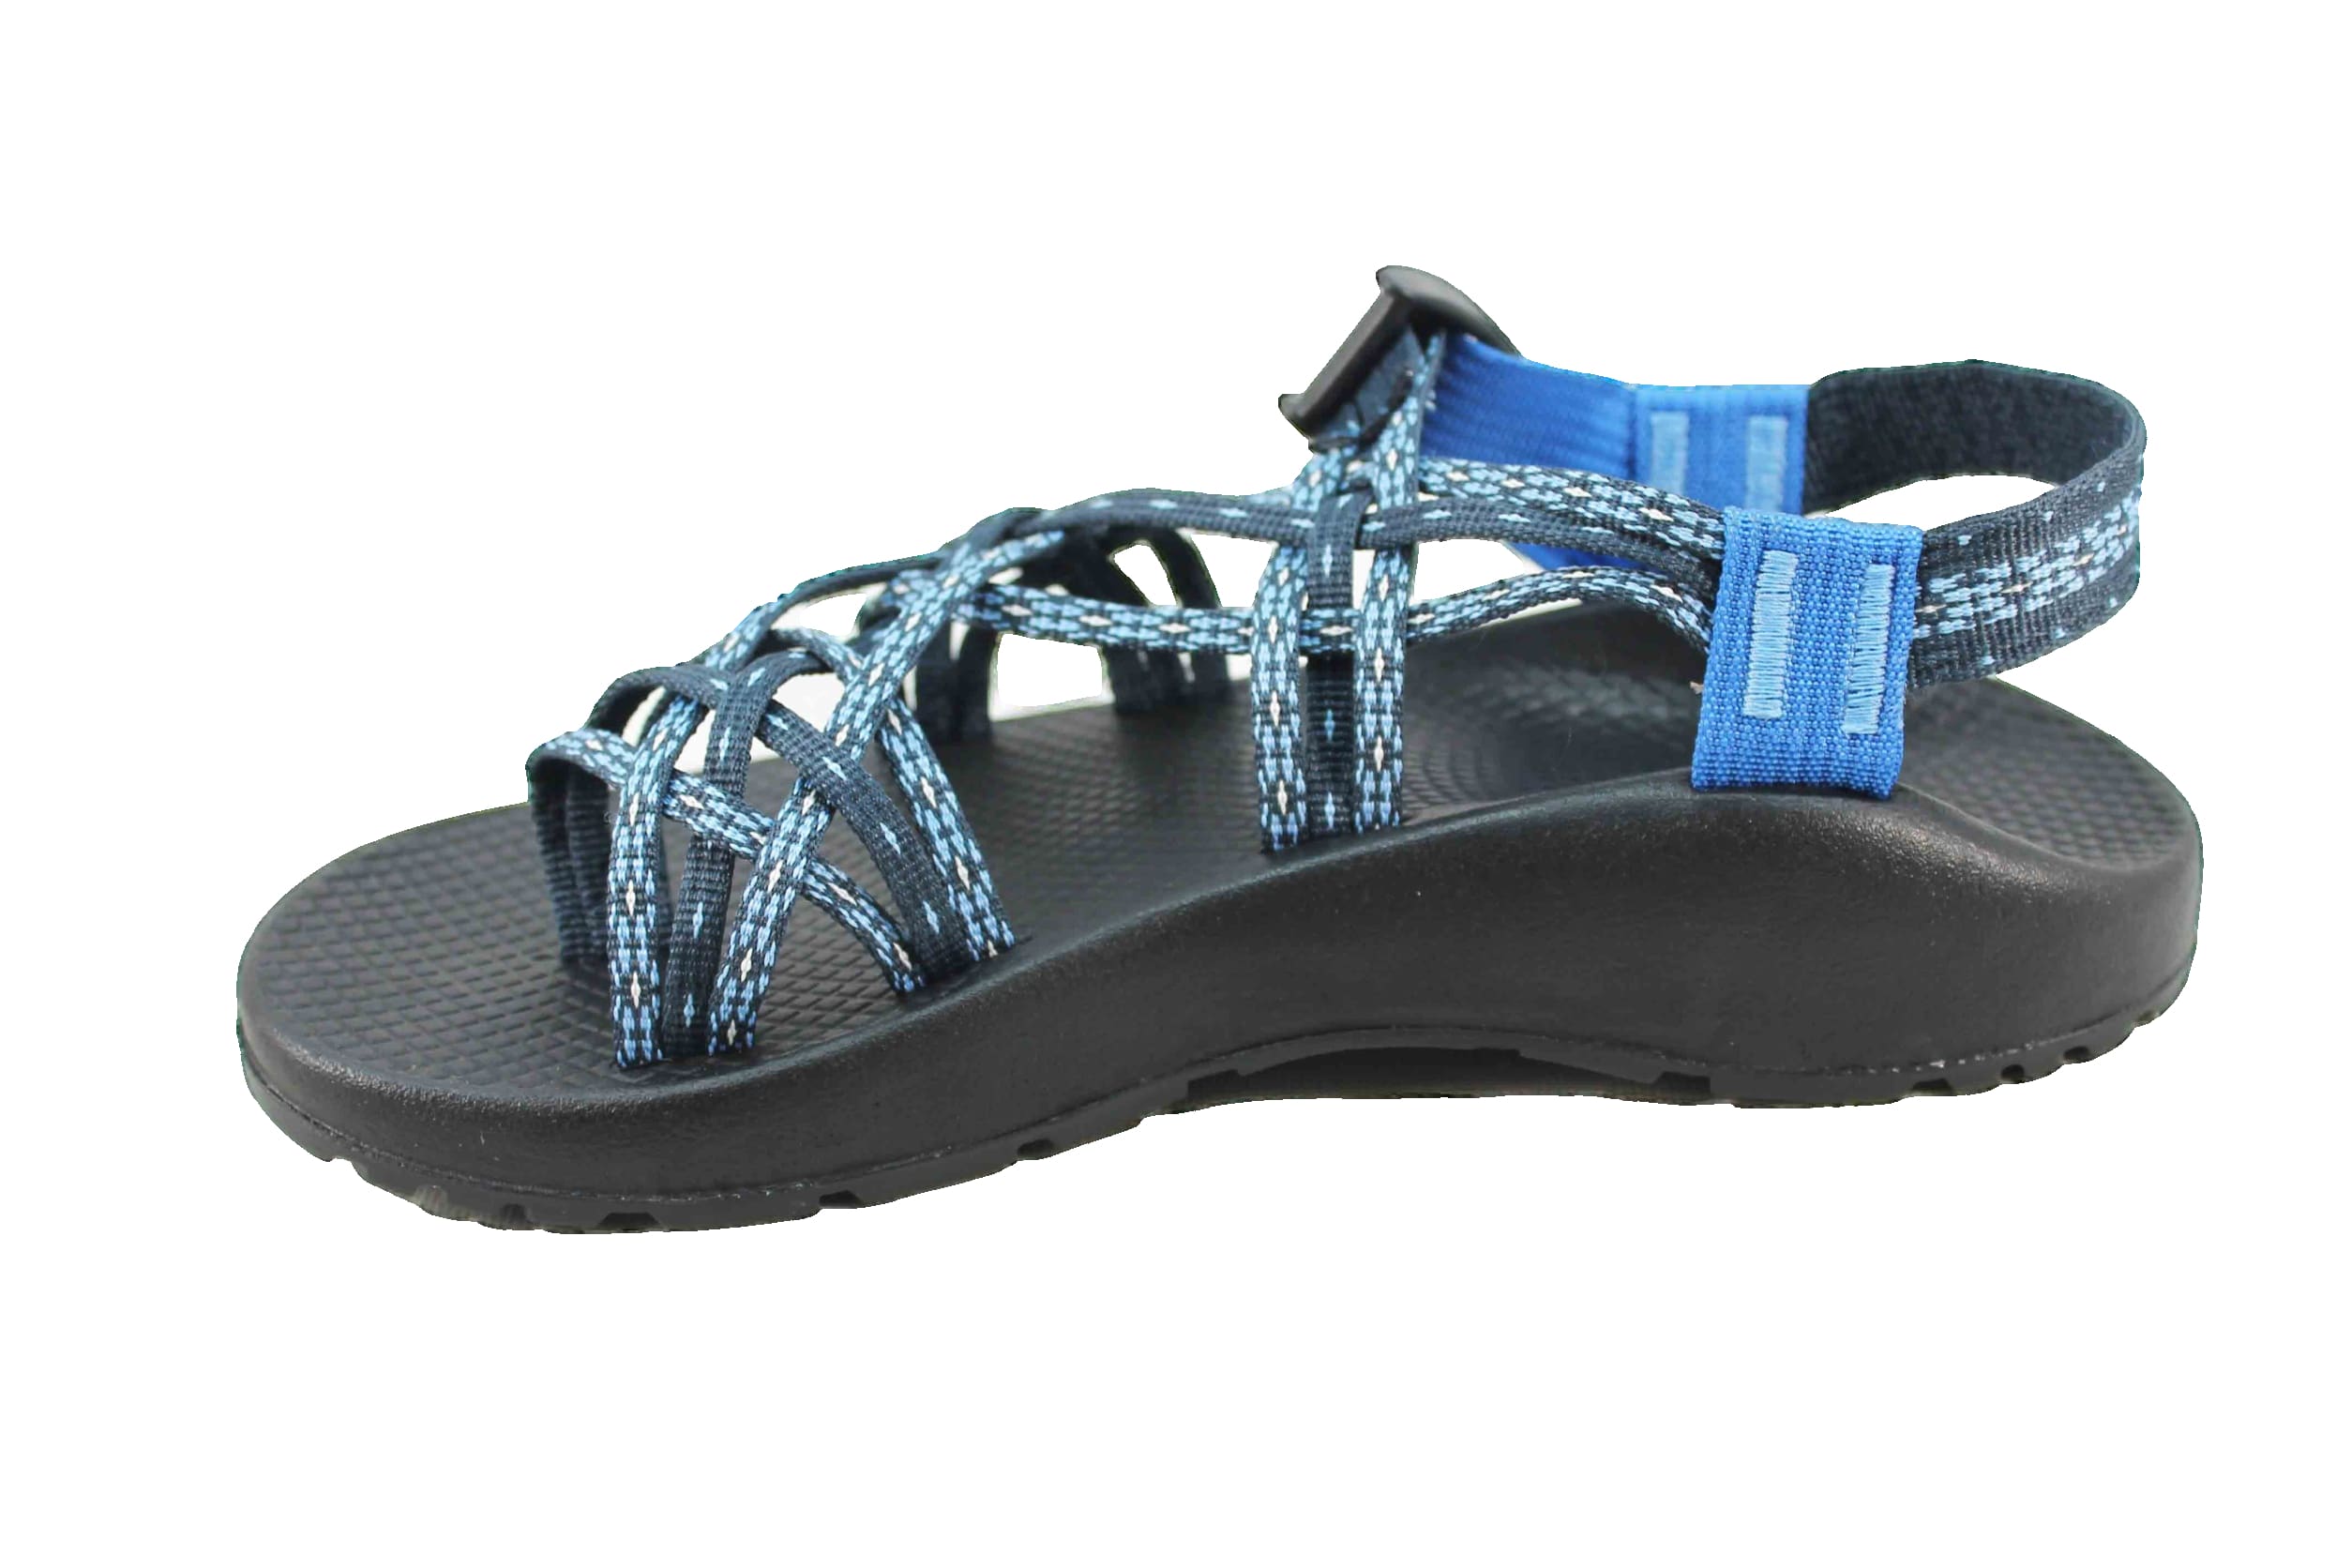 zx3 chacos